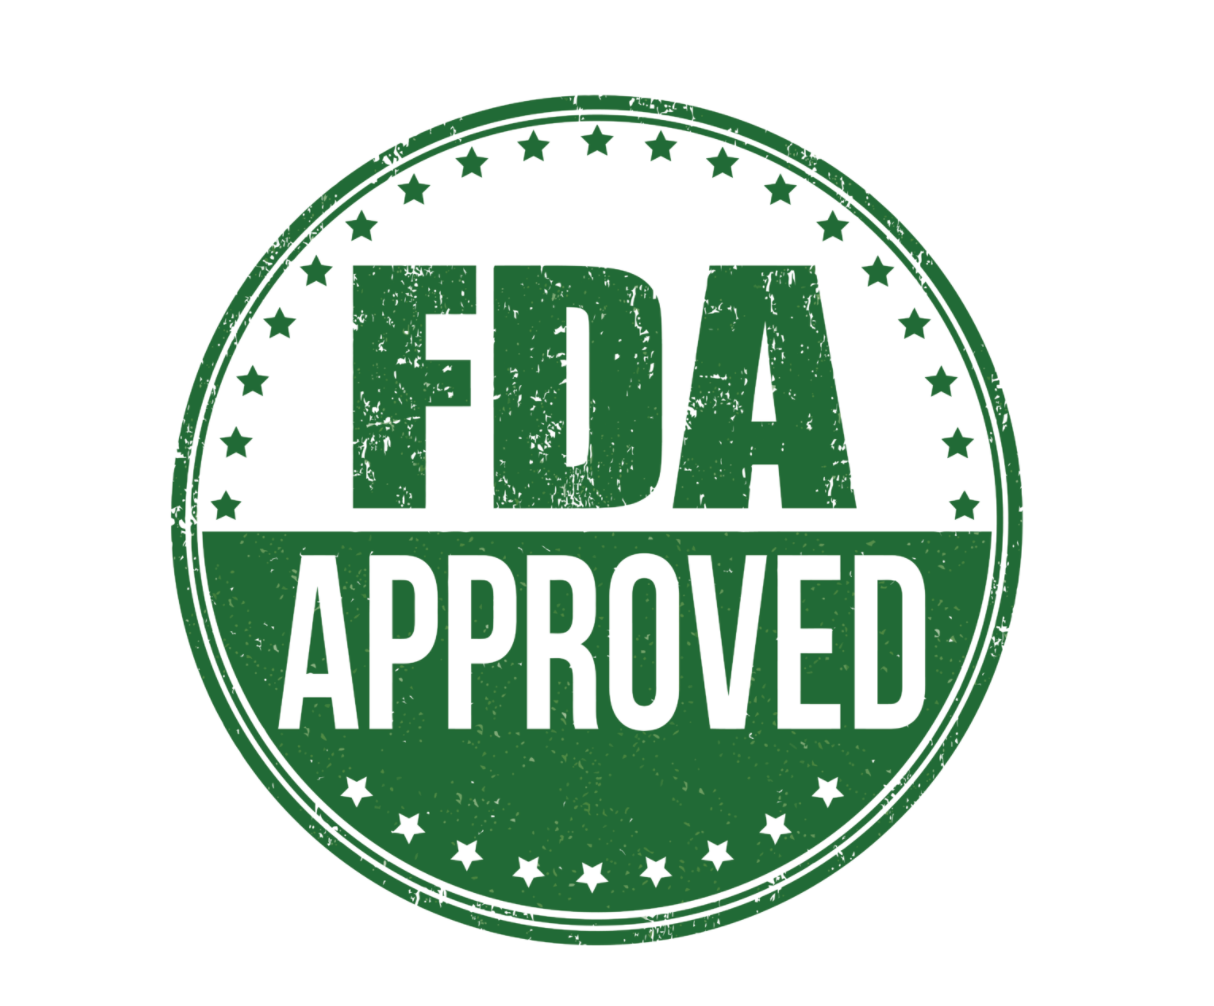 FDA Approves Adbry for Treatment of Moderate-to-Severe Atopic Dermatitis